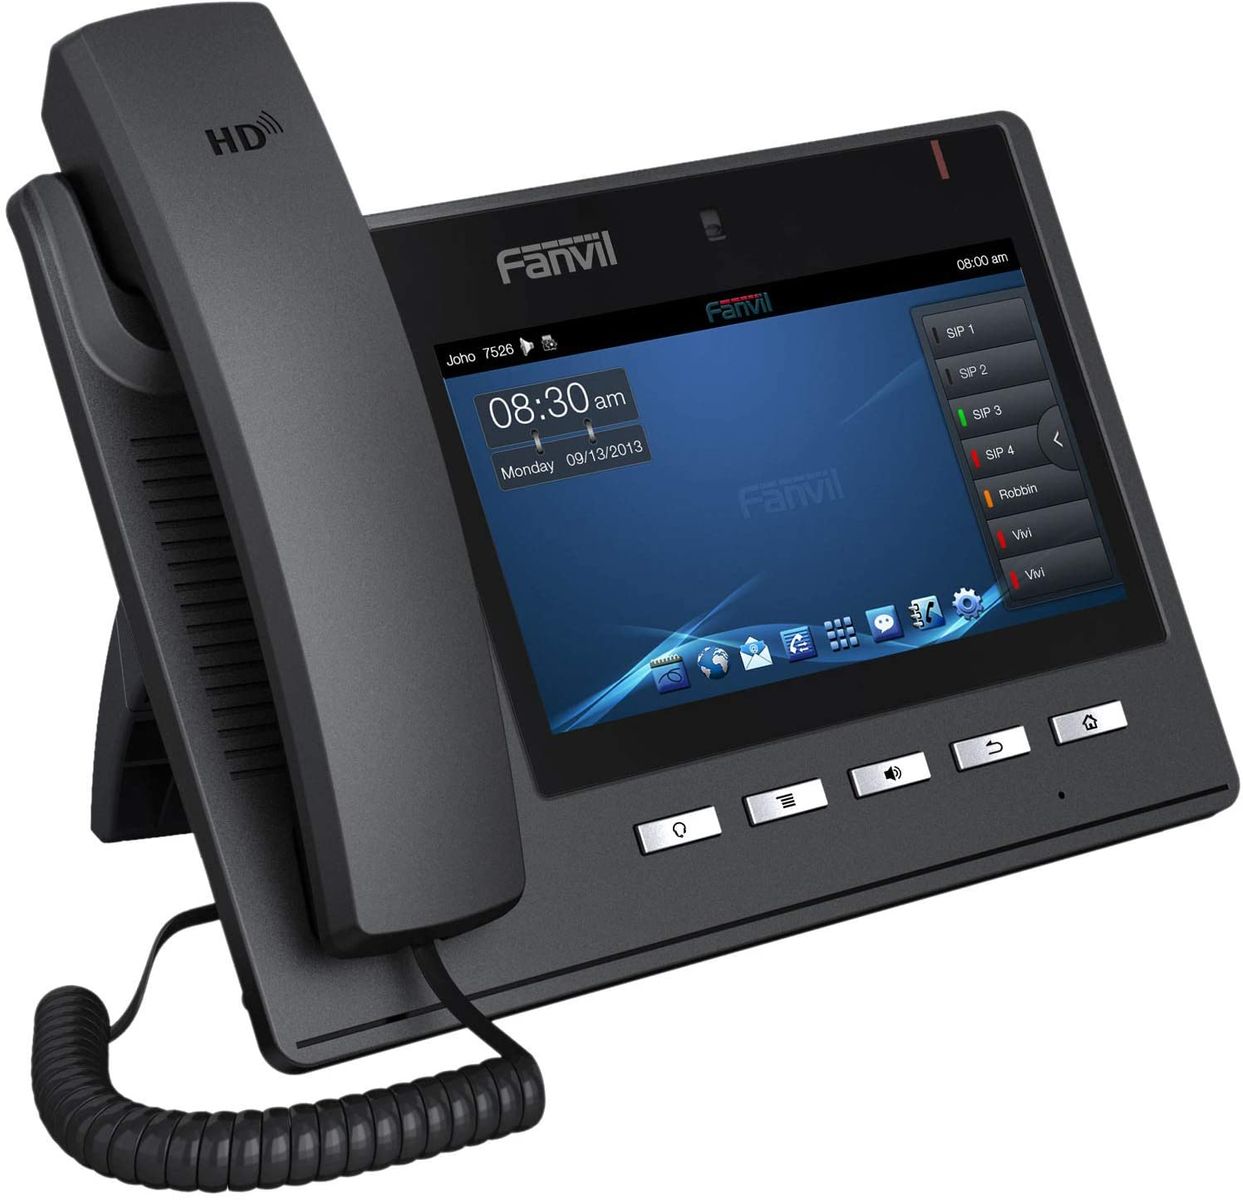 Fanvil C600 Video TELEFONO VOIP Android